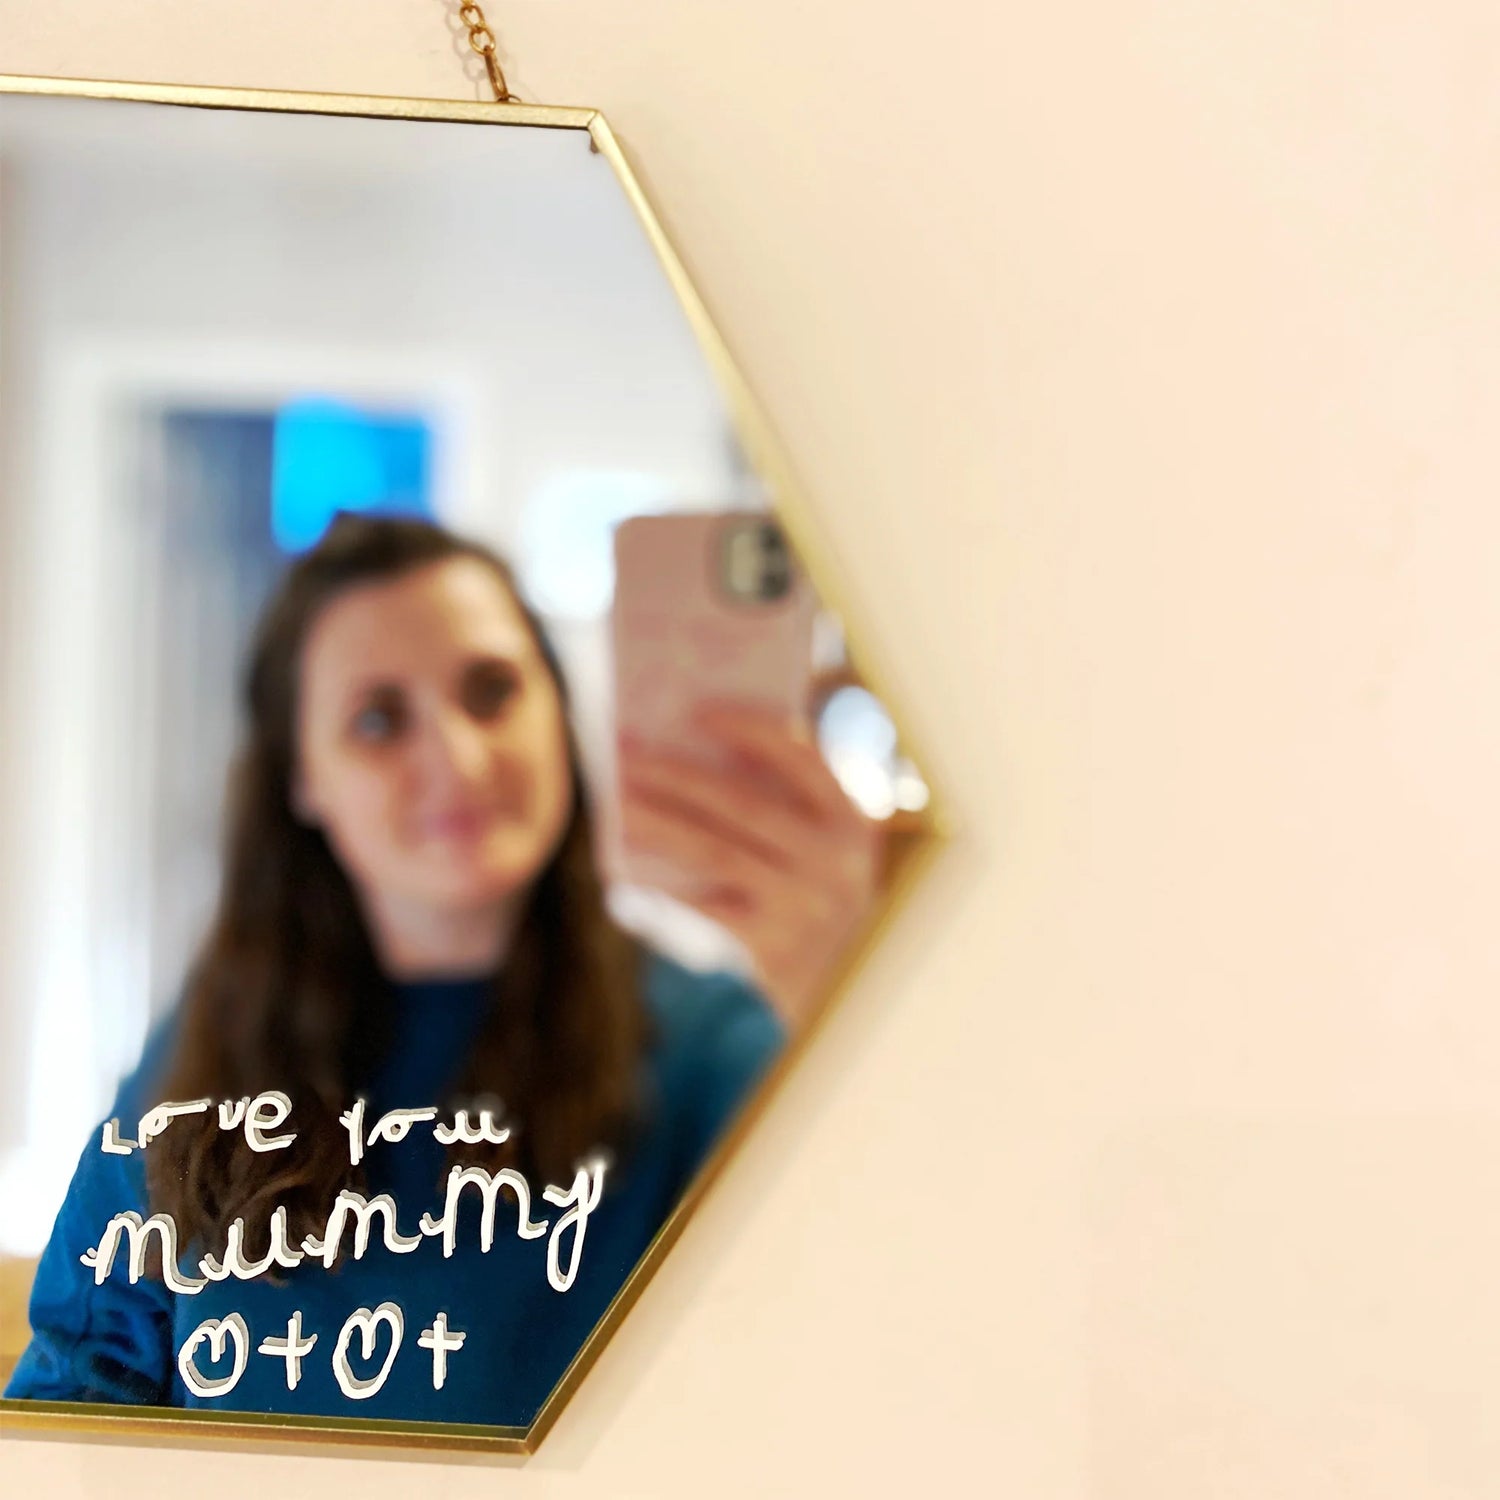 personalised mirror sticker with handwriting